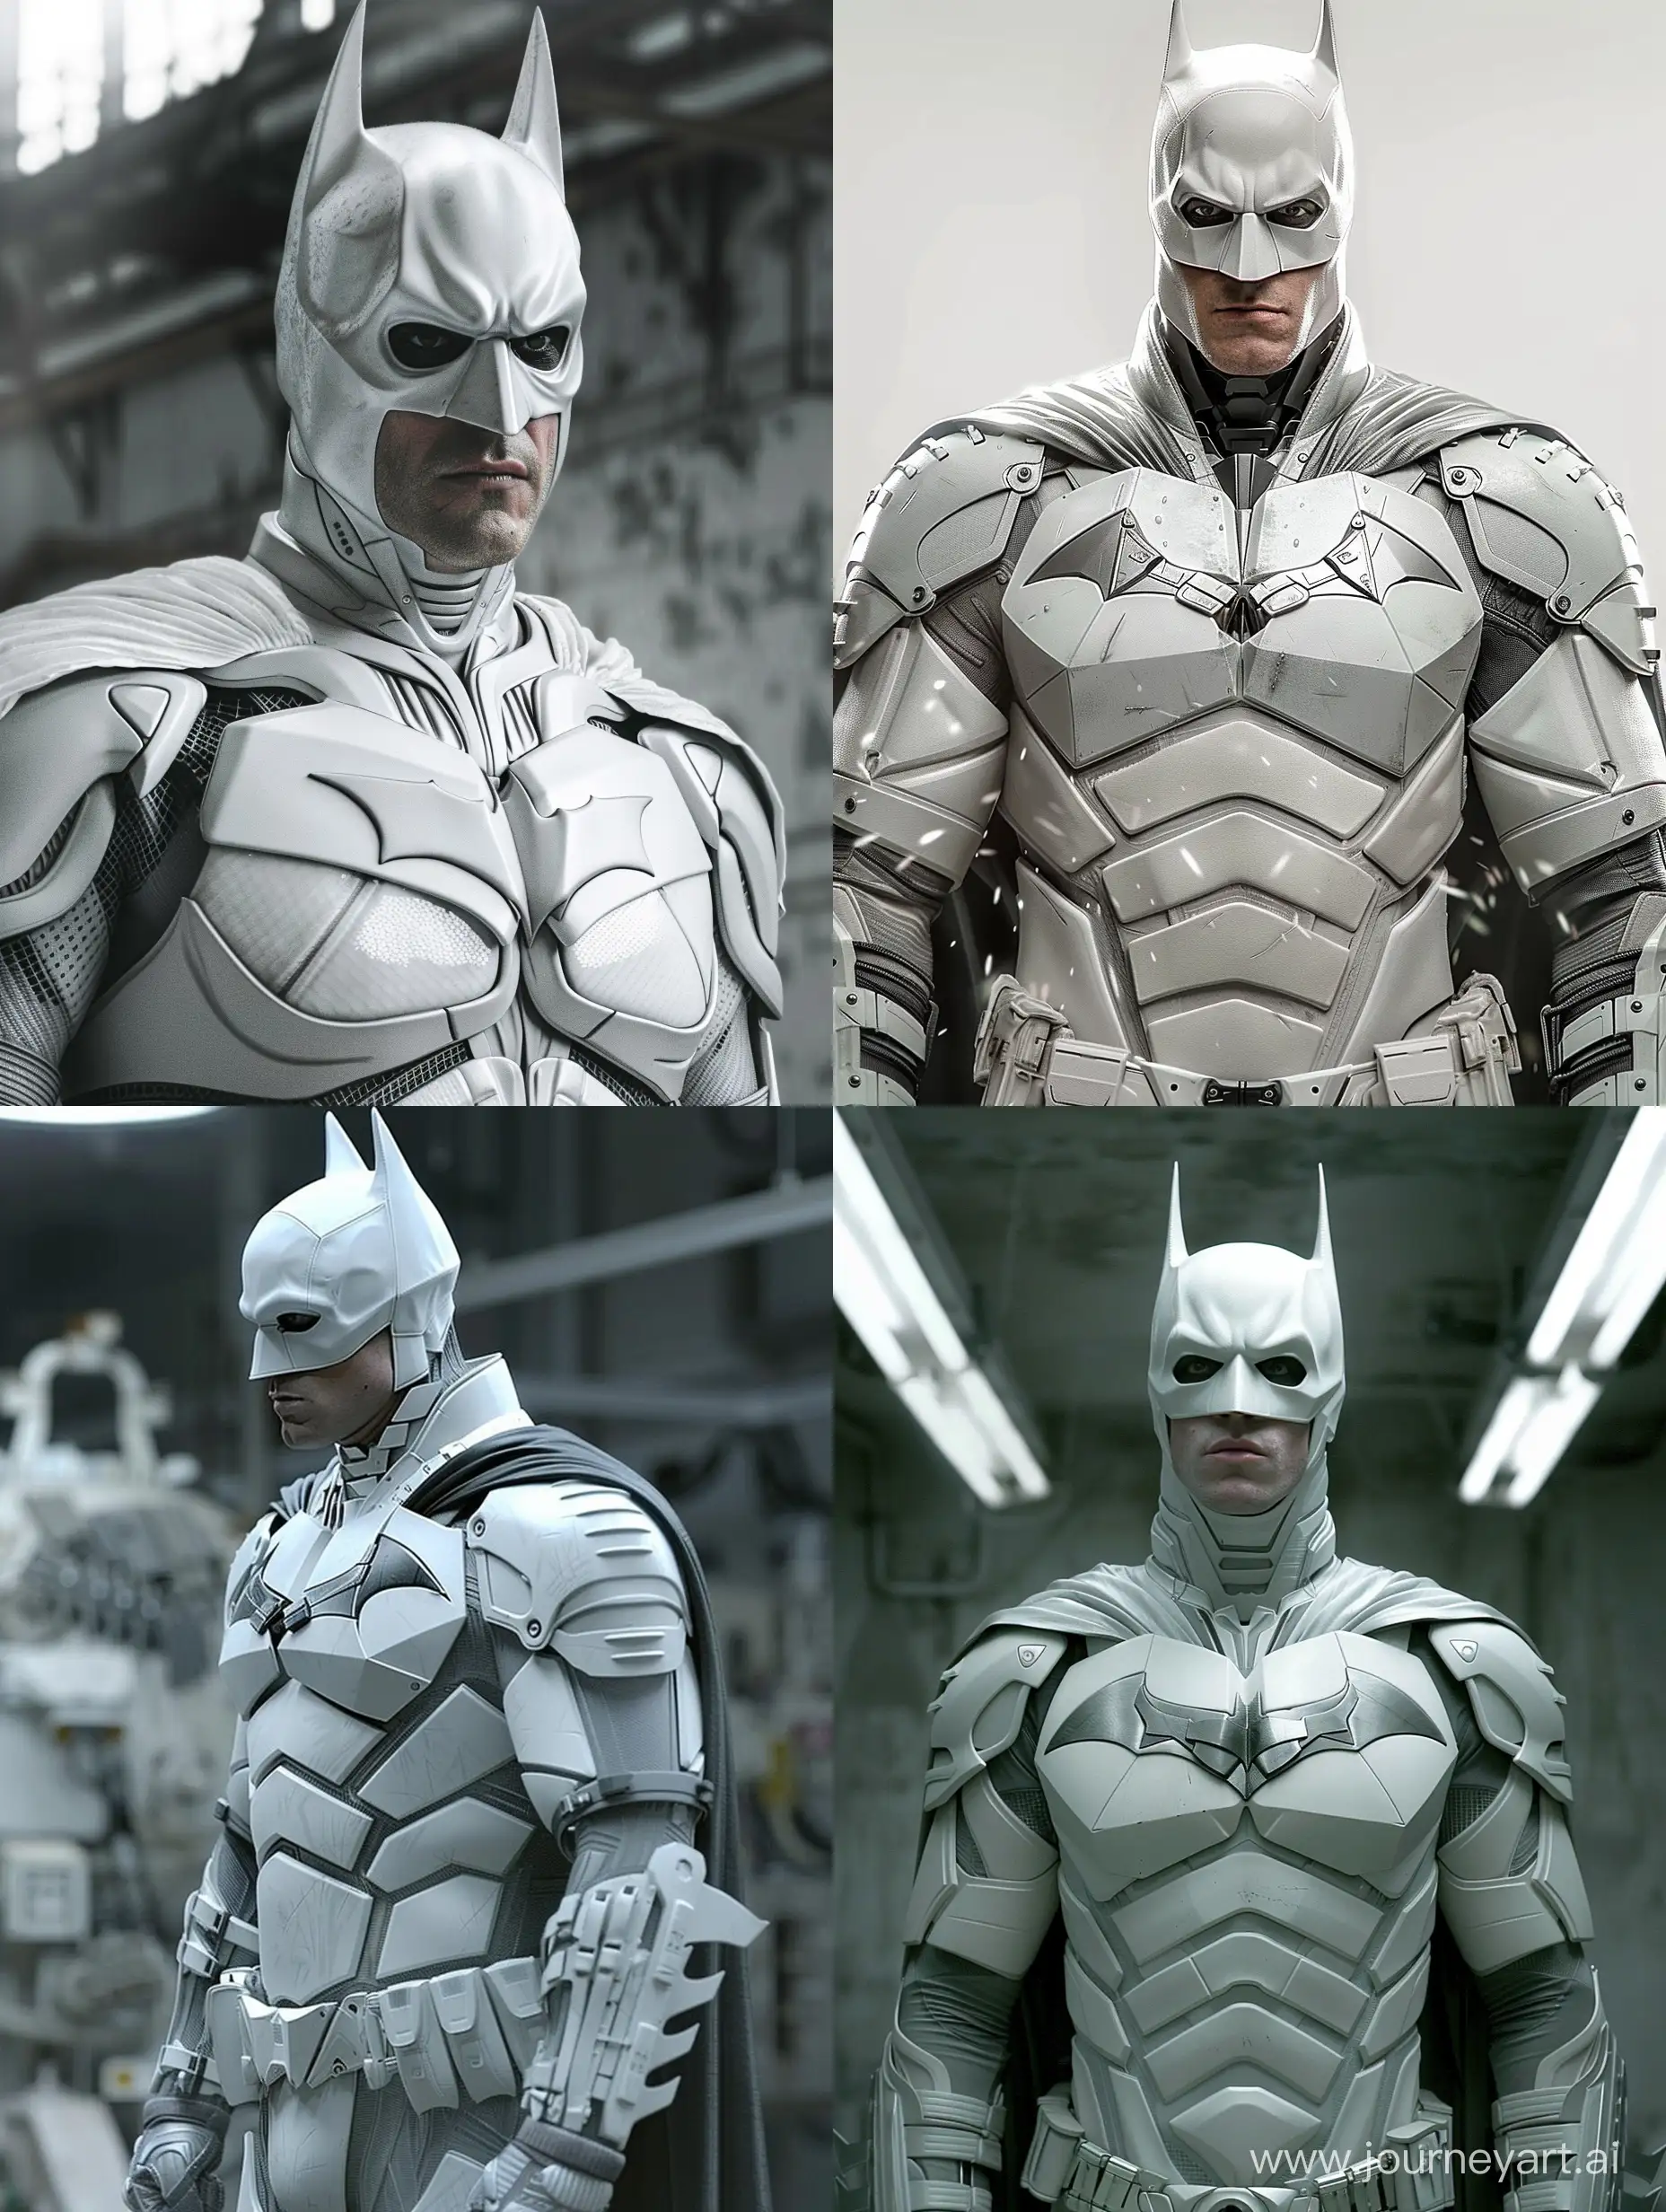 Christian Bale as Batman in white suit ultra-realistic